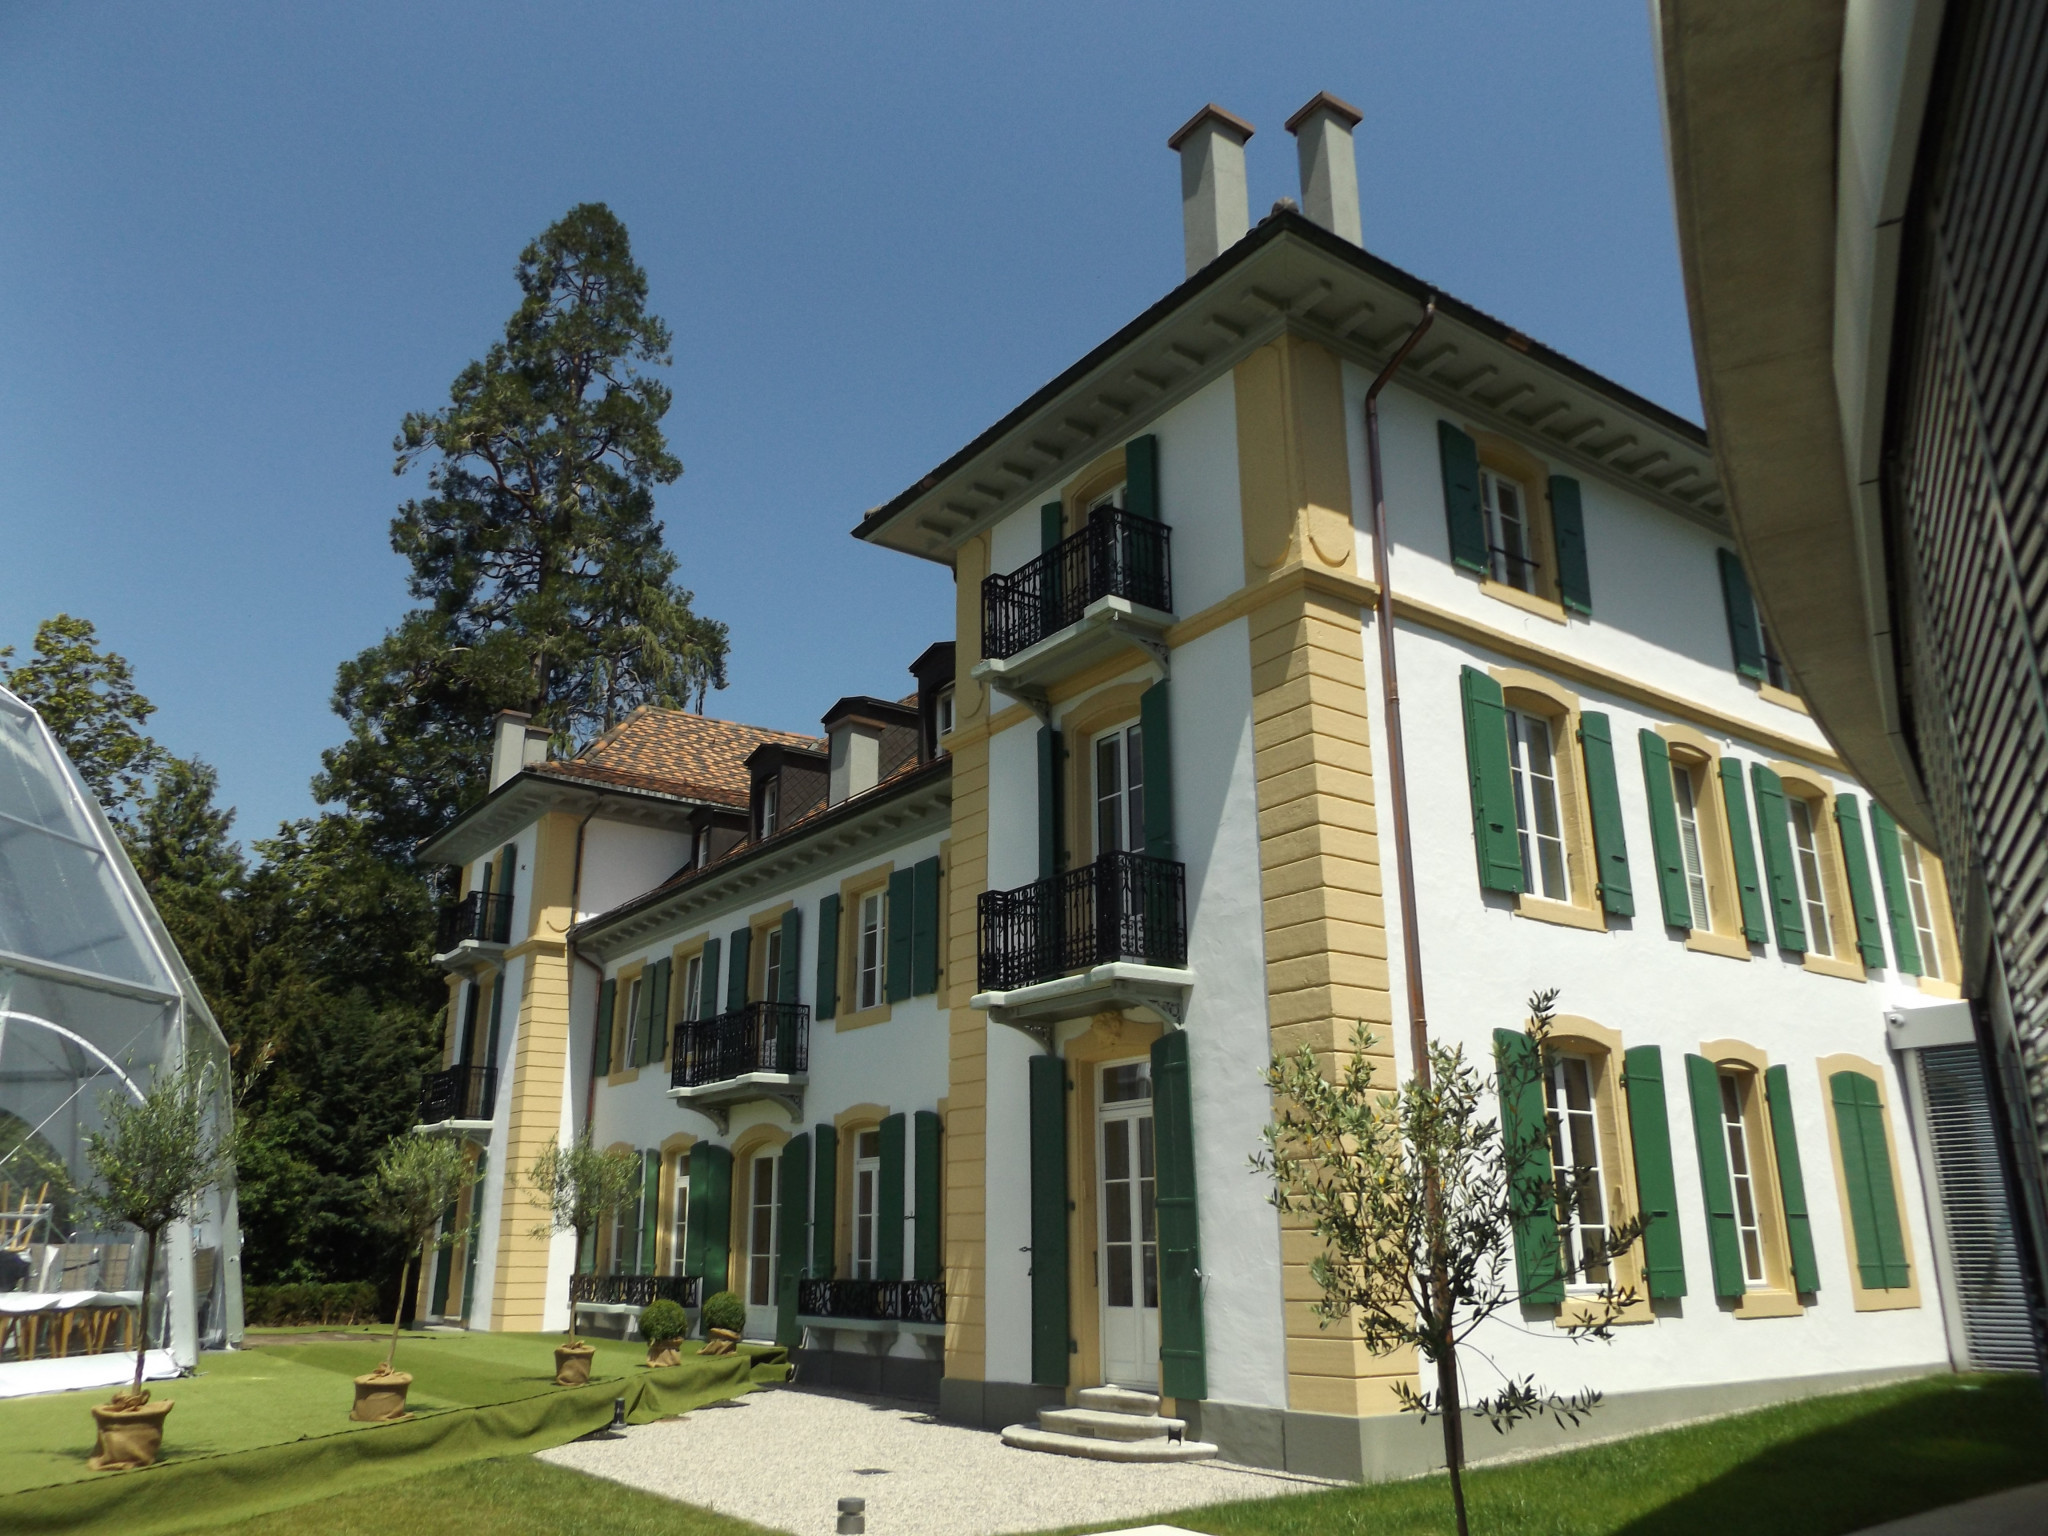 The Chateau de Vidy in Lausanne is a regular host venue for IOC Executive Board meetings ©Philip Barker